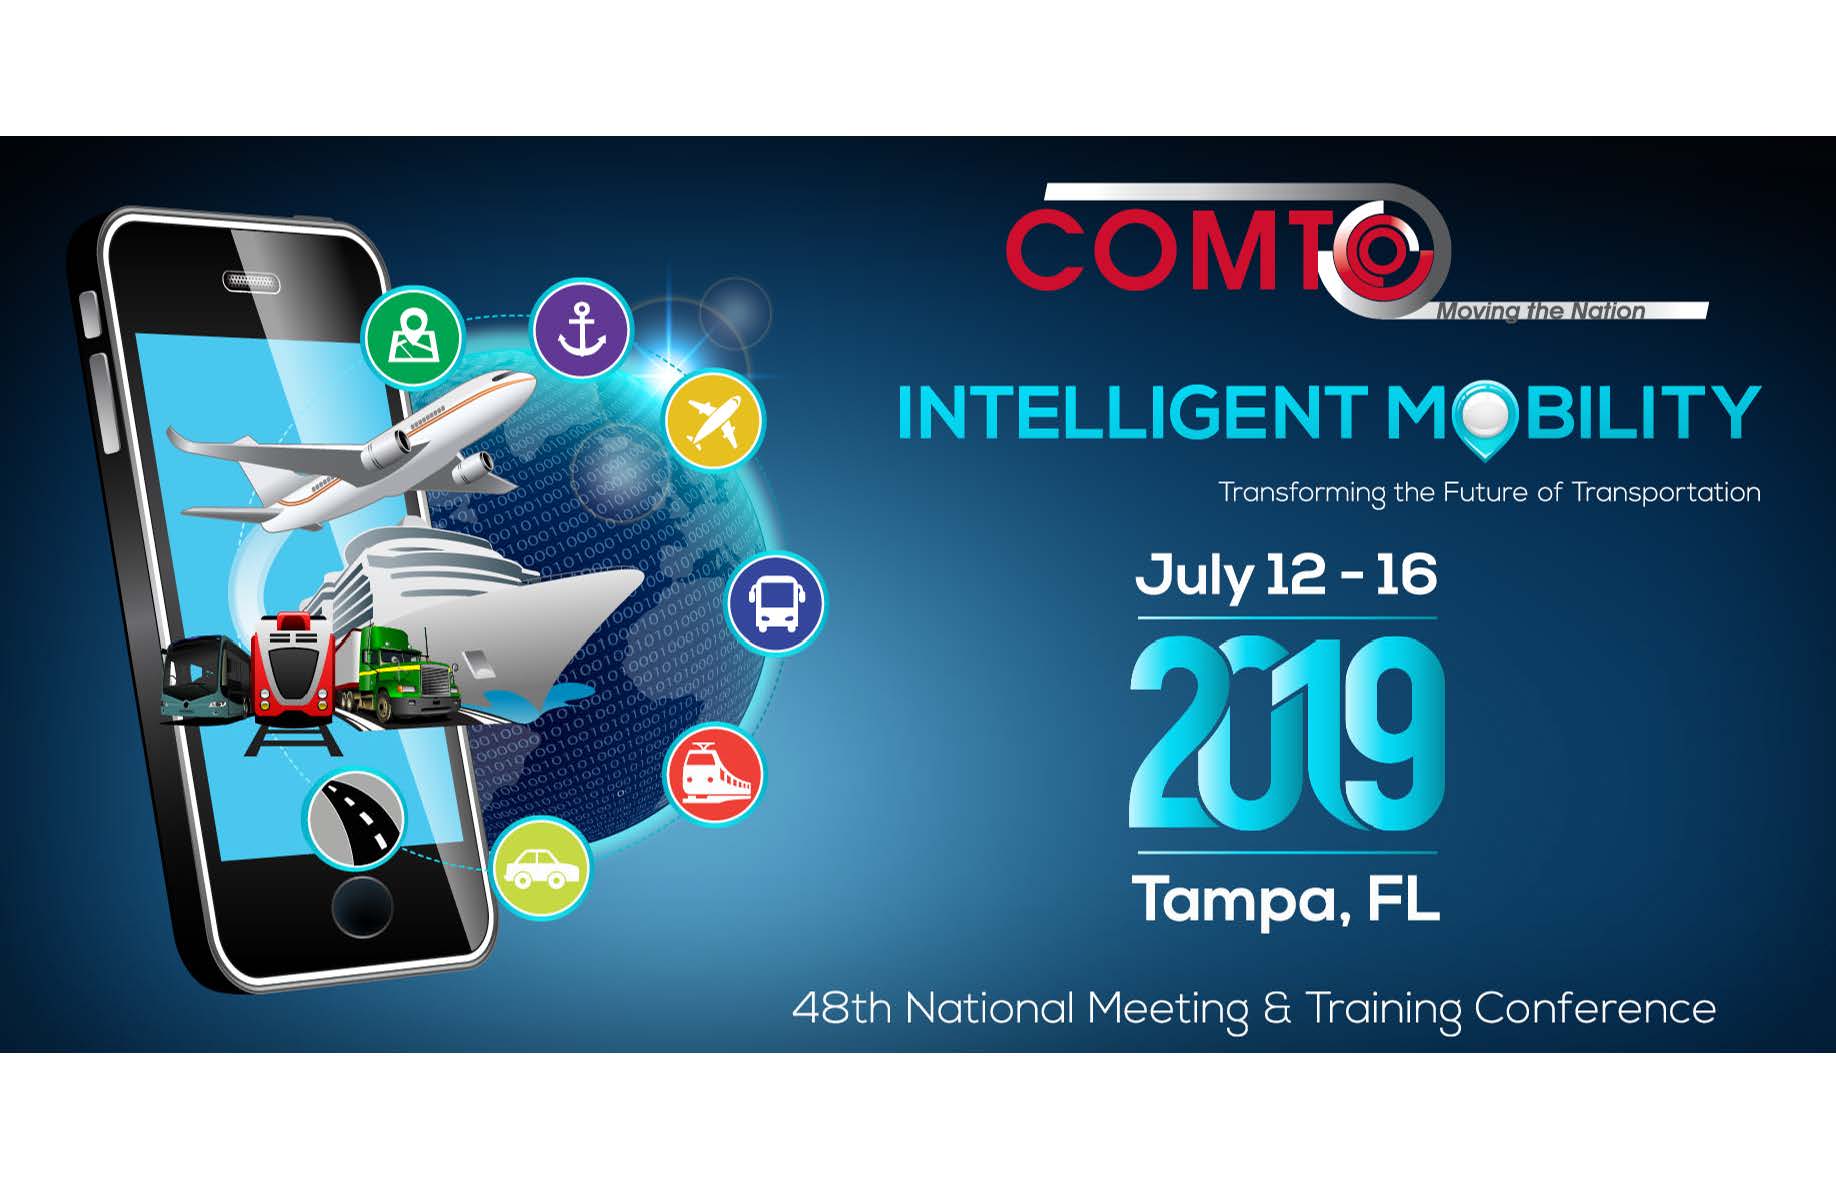 COMTO Comes To Tampa Bay